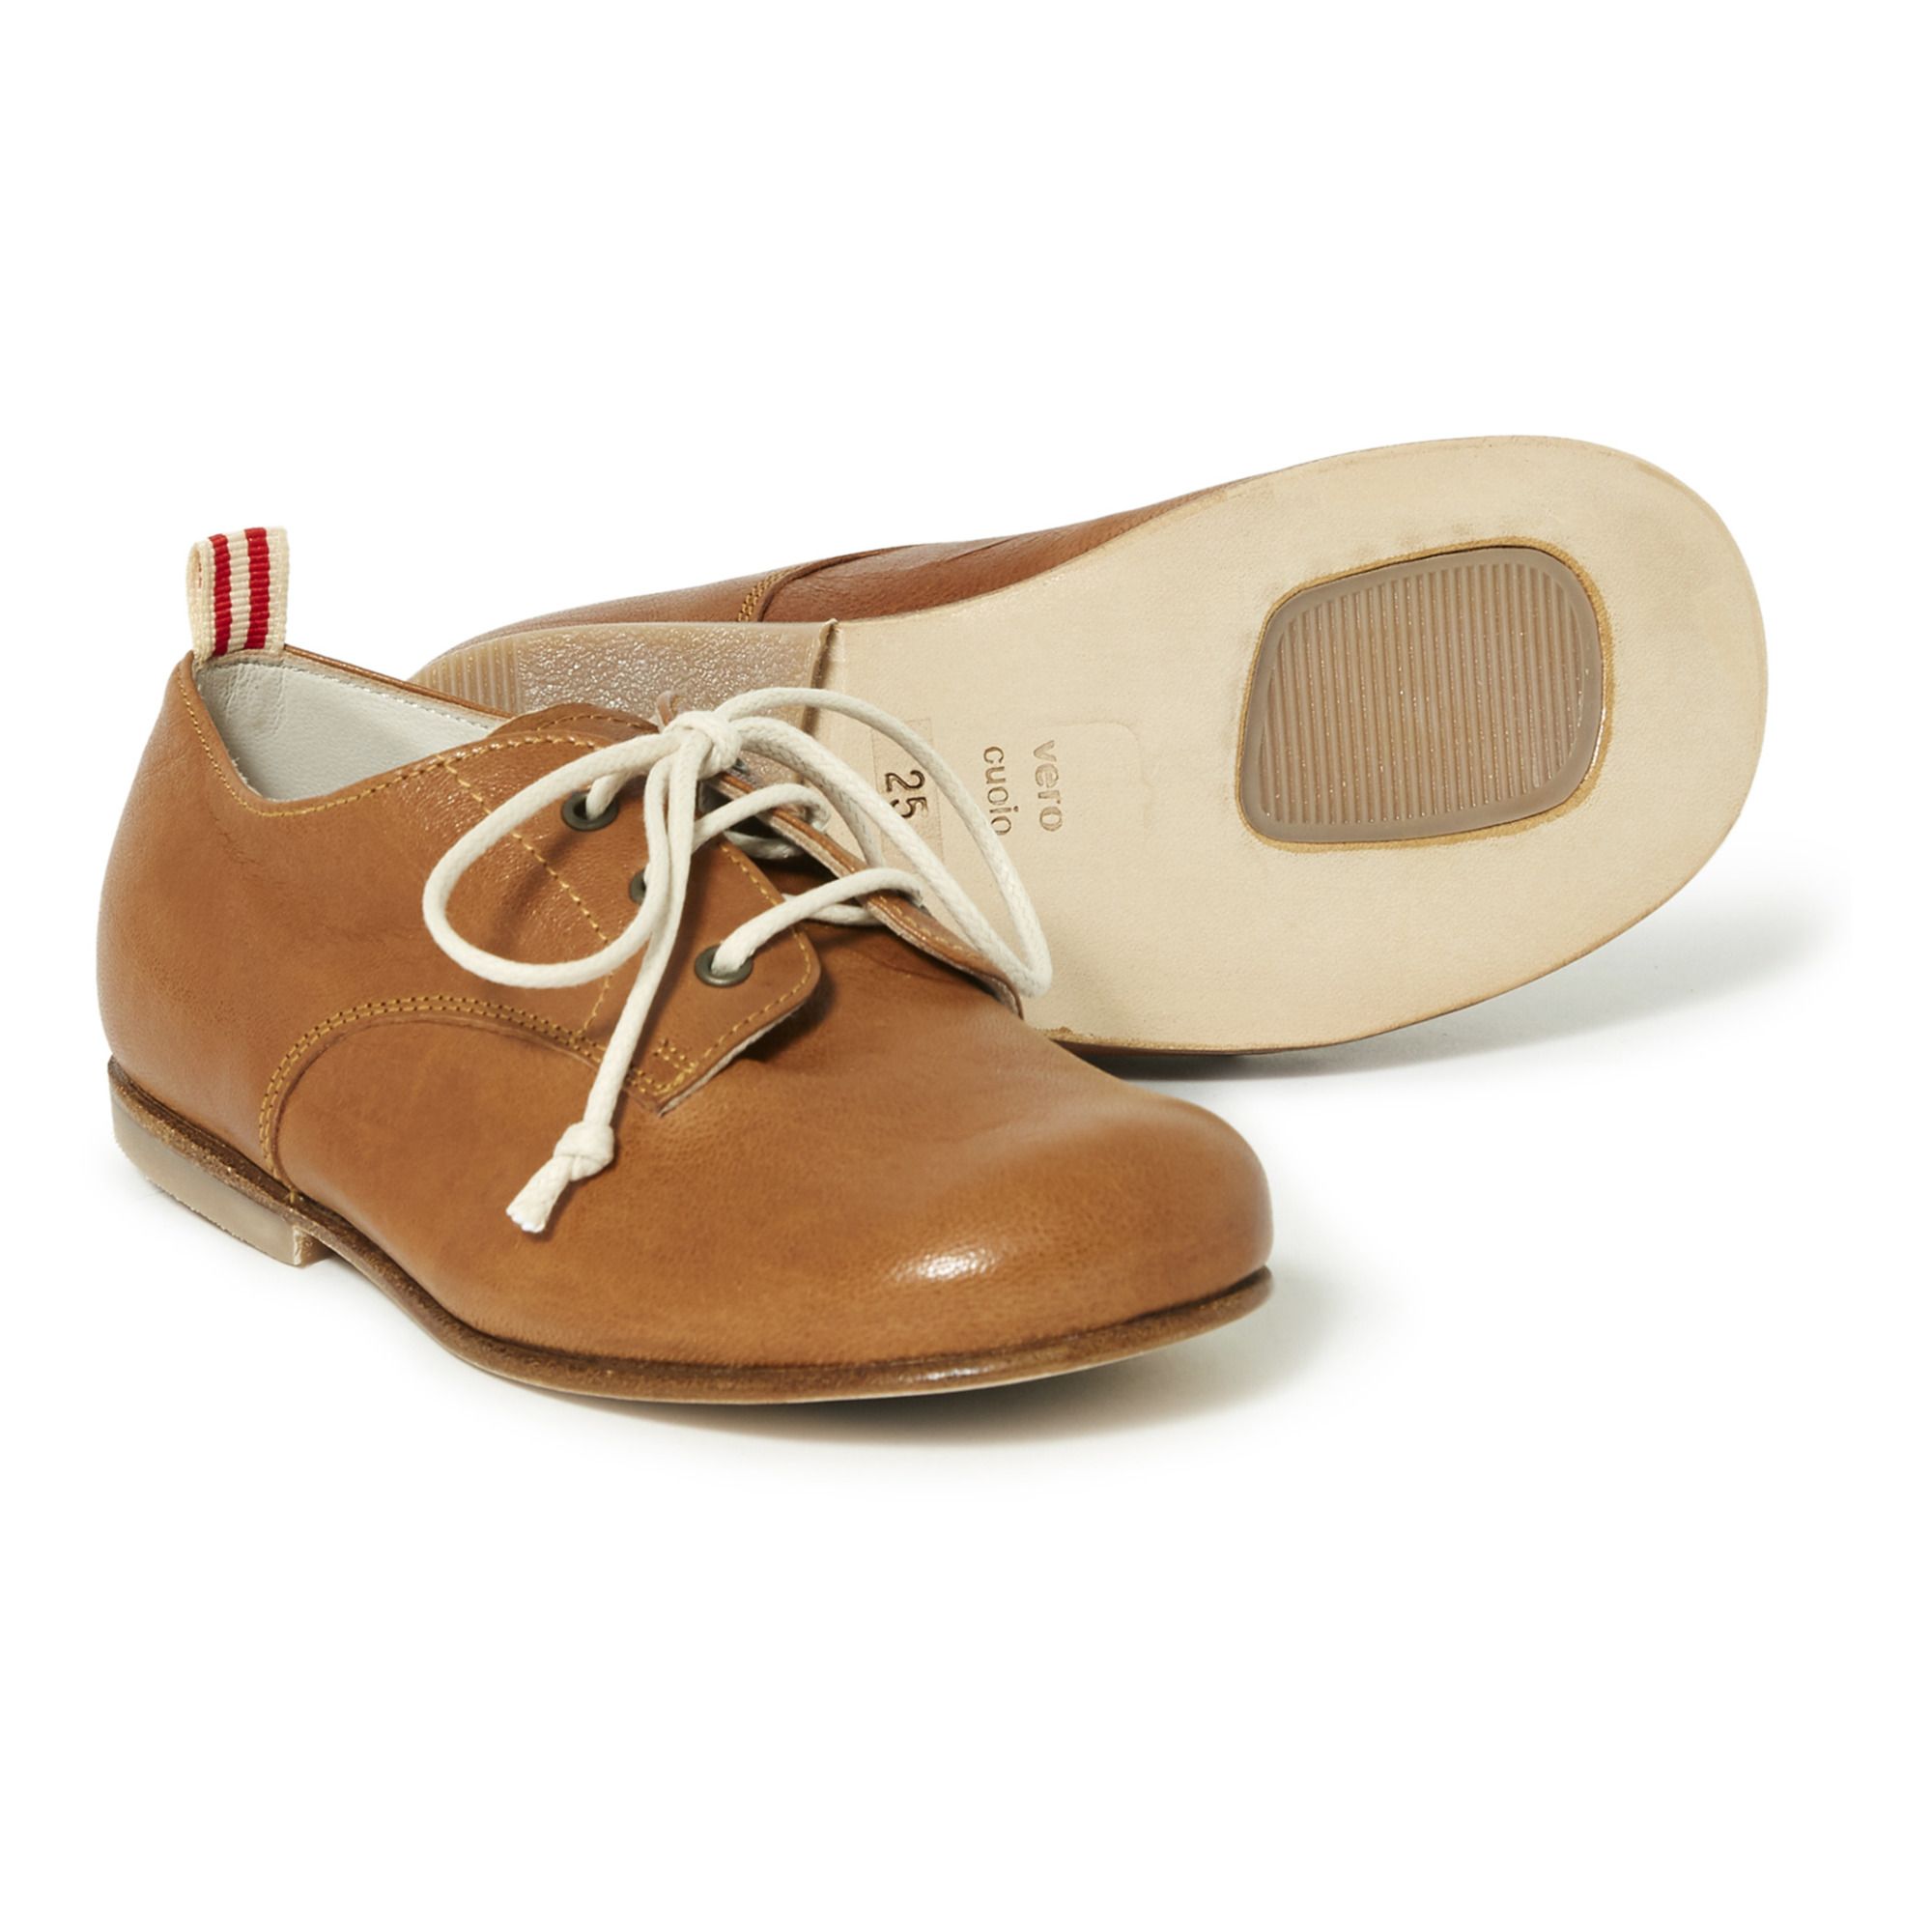 85  Caramel pressed shoes for Girls